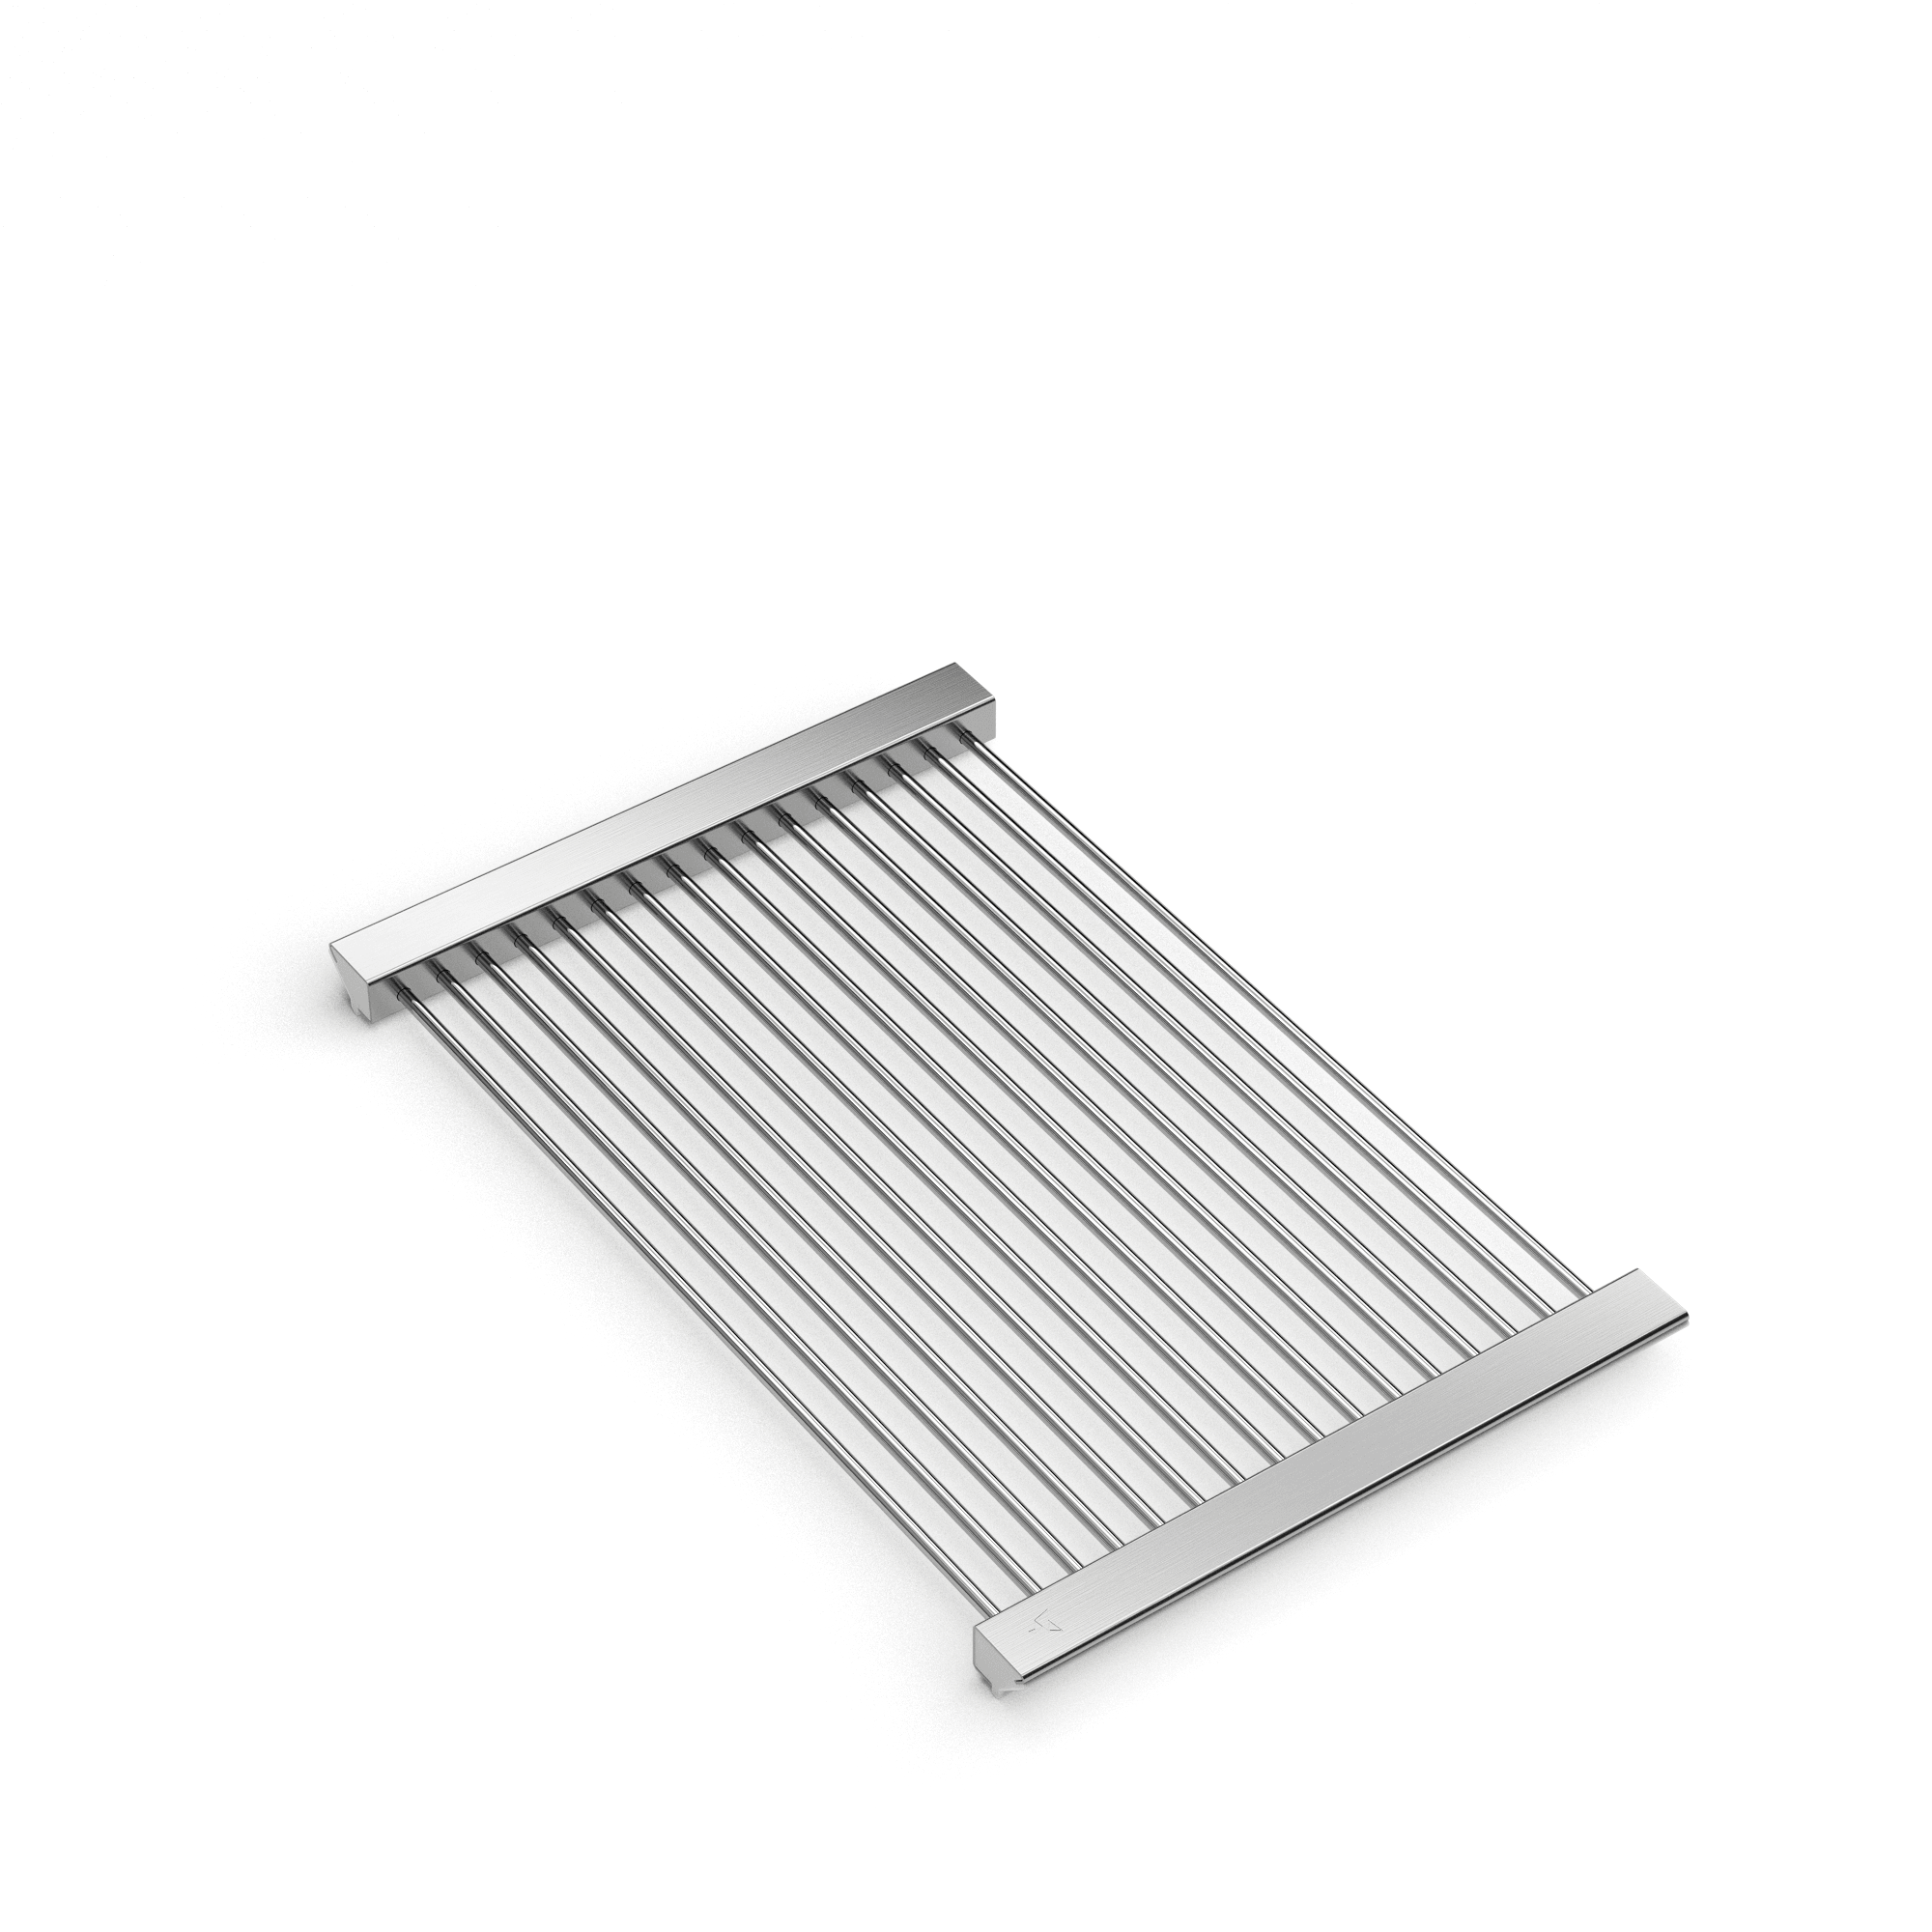 Artinox Layer sink drying rack (BLR compatible), stainless steel - 14 - Olif